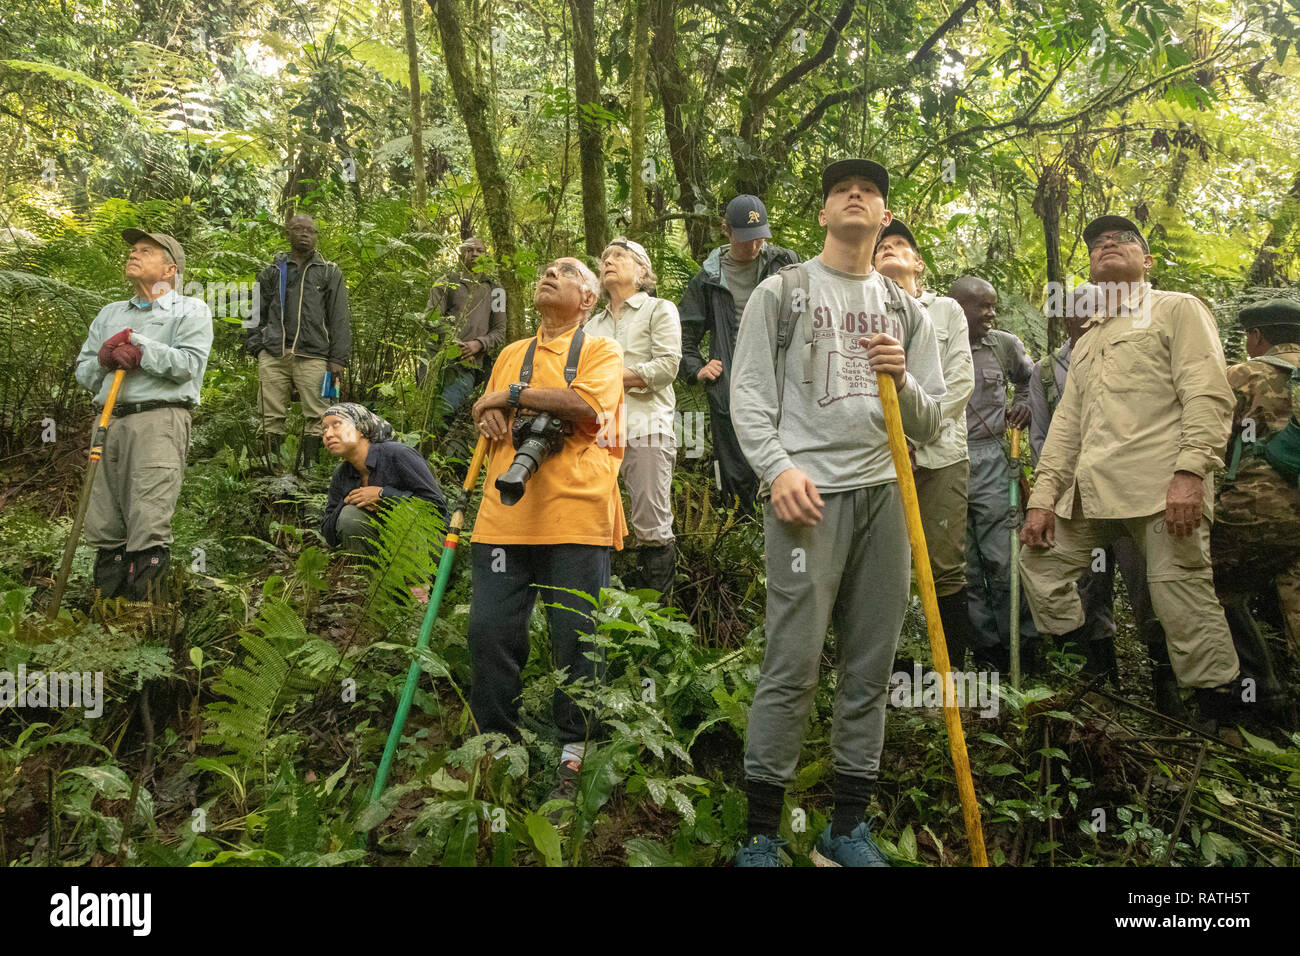 tourists on safari watching mountain gorillas, waiting for them to descend from tall trees, Bwindi Impenetrable Forest, Uganda, Africa Stock Photo